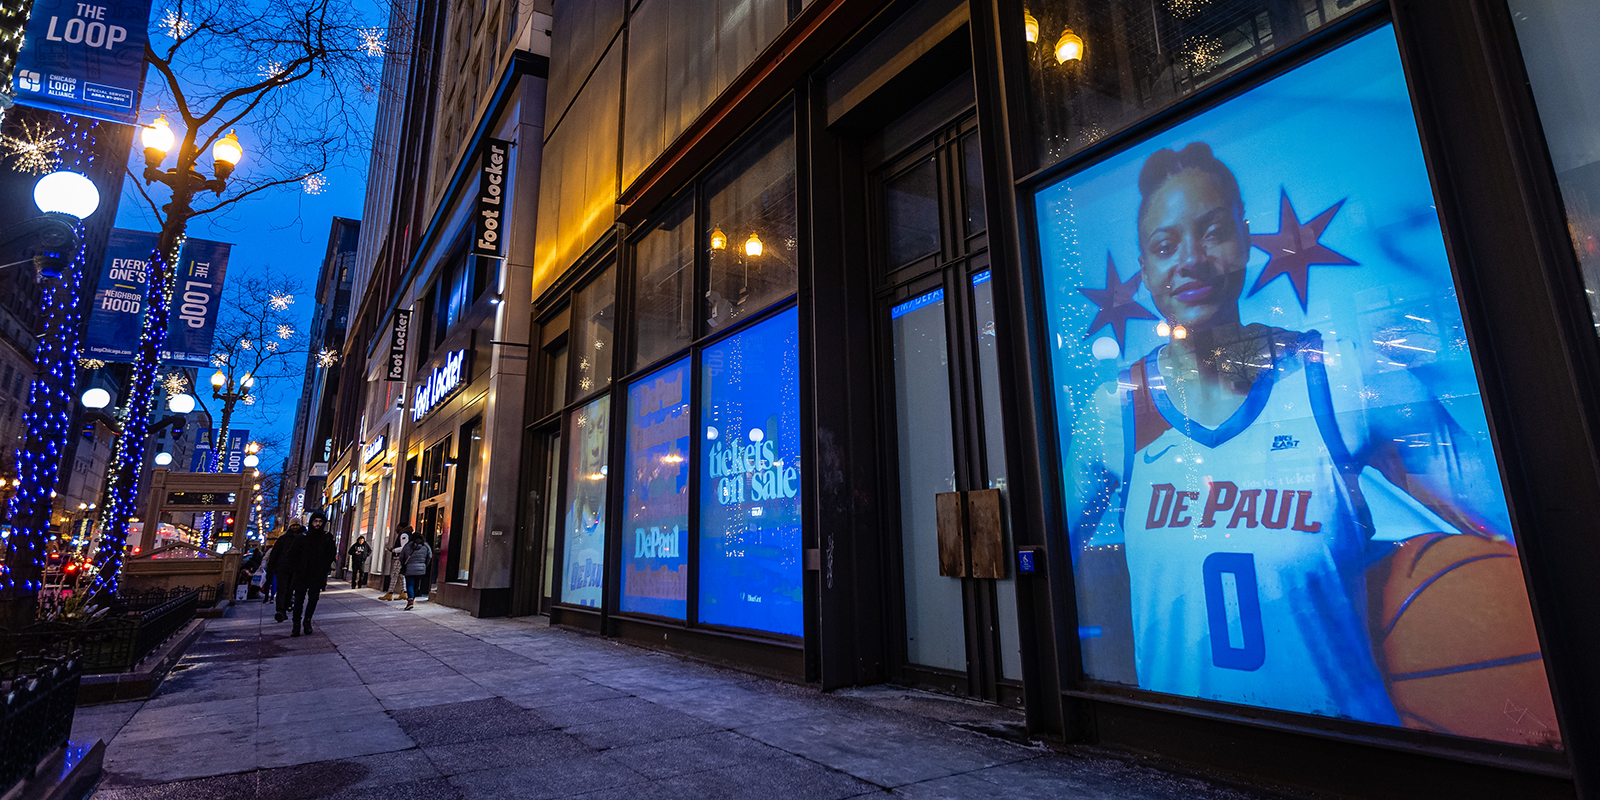 Images and videos of DePaul basketball players are displayed in a storefront on State Street